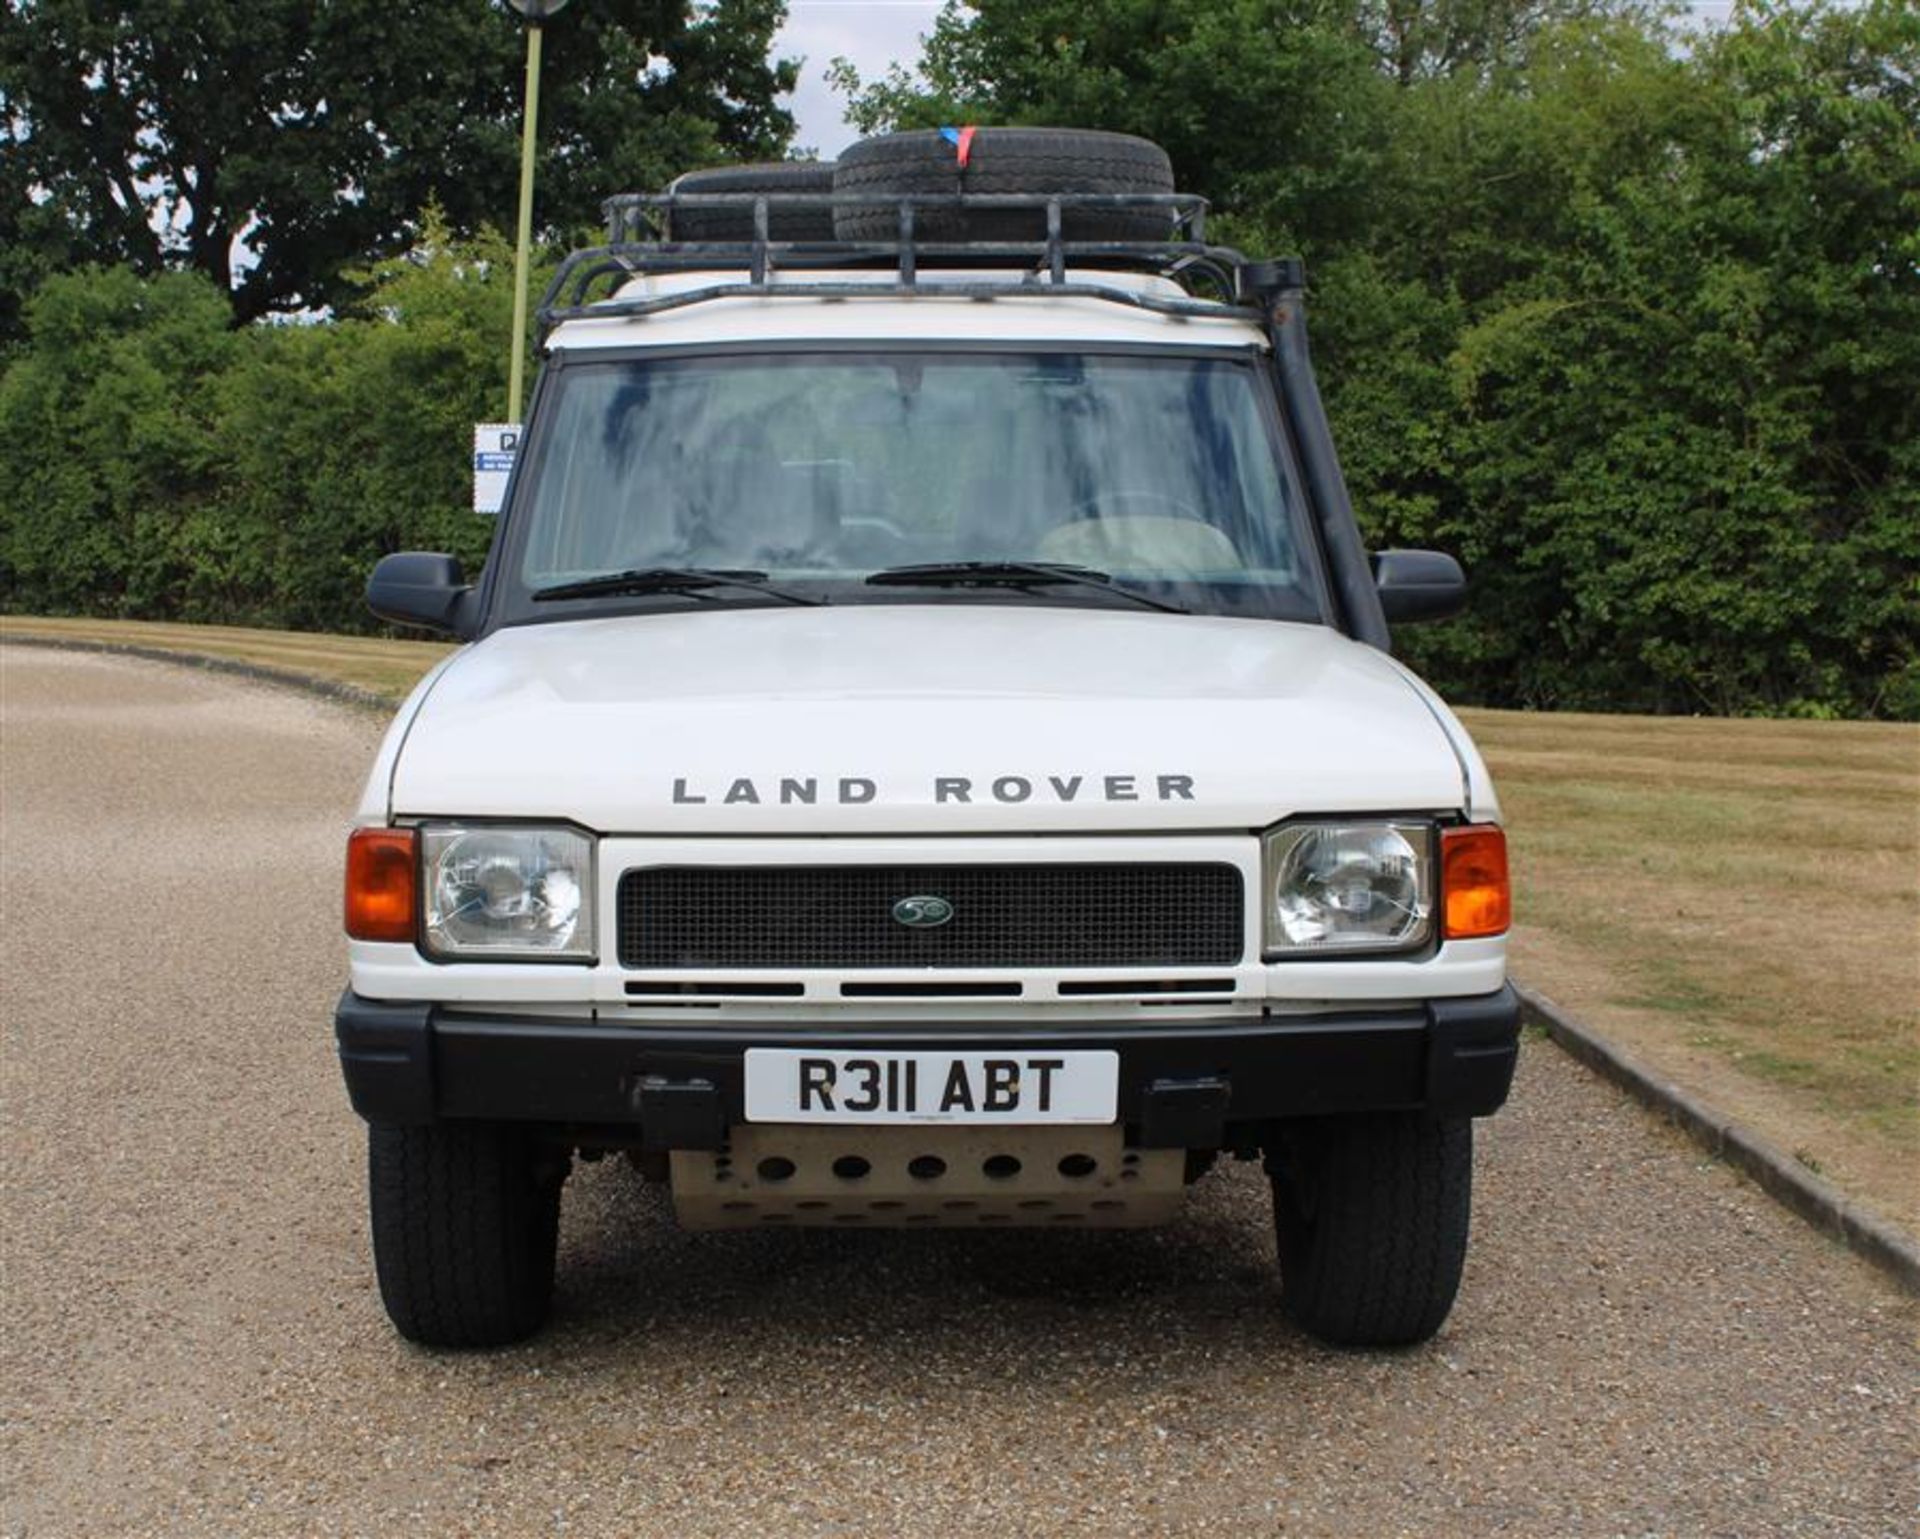 1998 Land Rover DiscoverySeries I 3.9 V8i LHD - Image 2 of 24